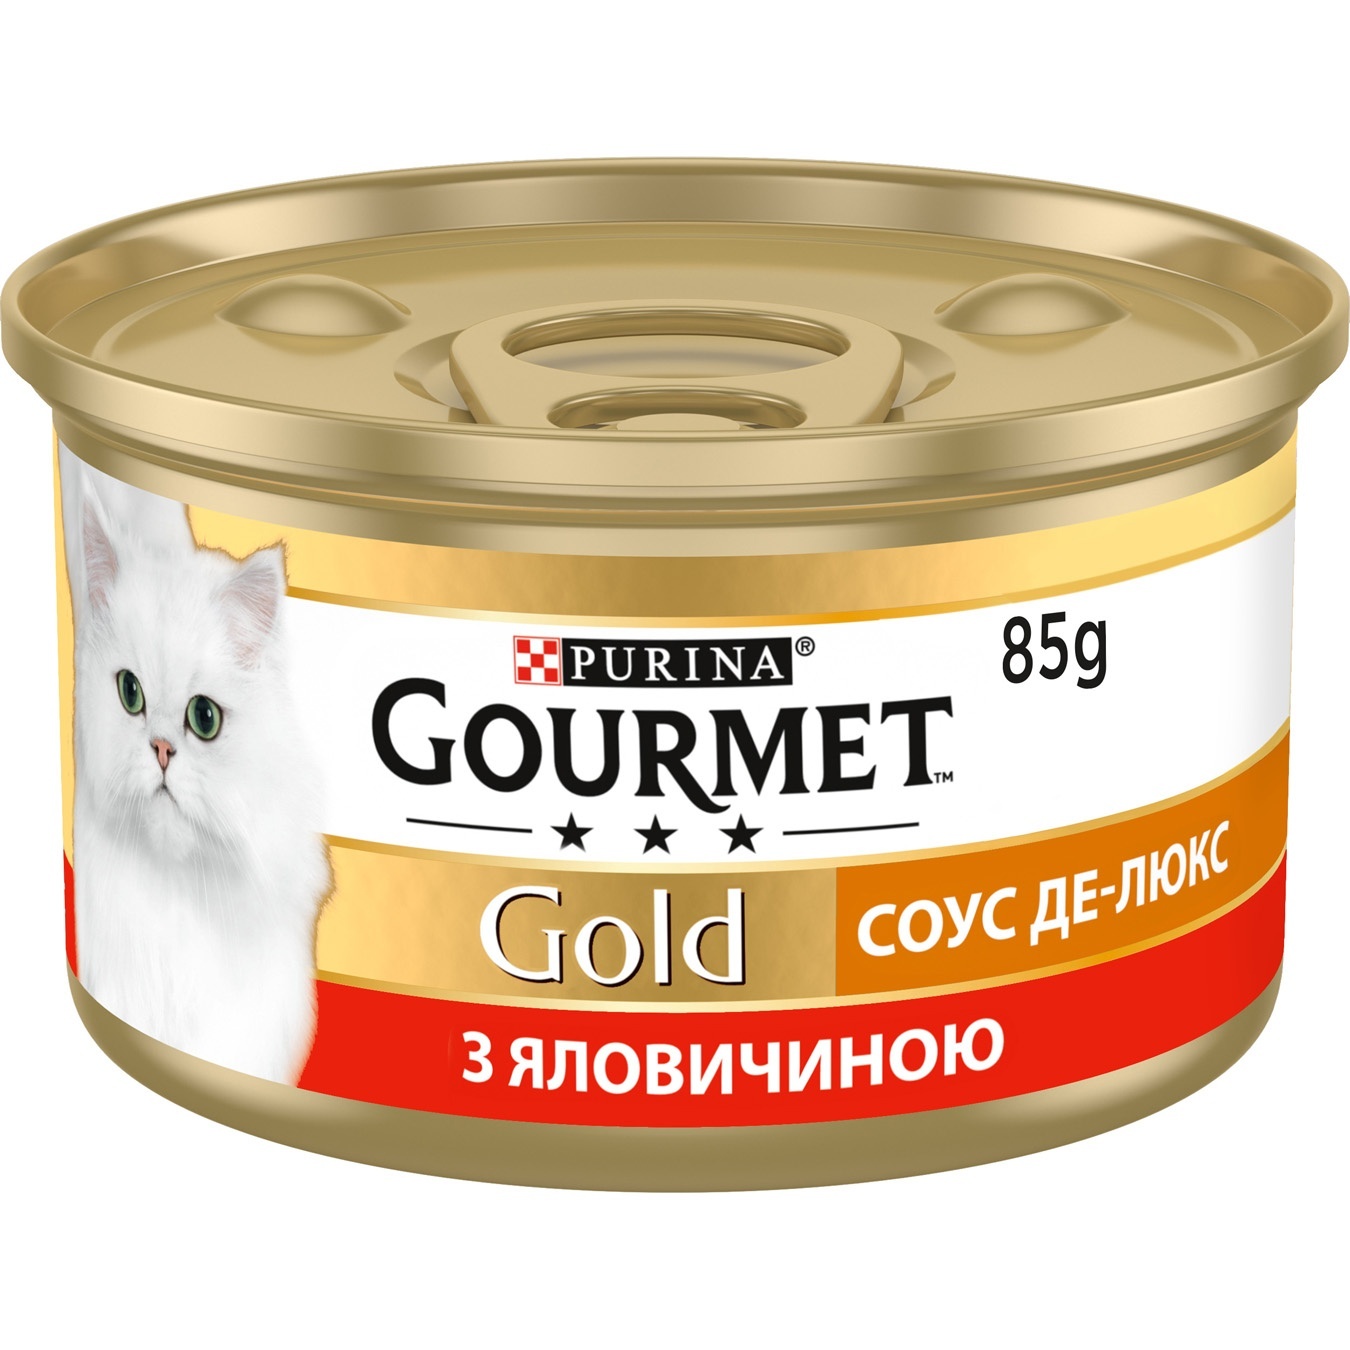 Purina Gourmet Gold with beef in sauce cat food 85g